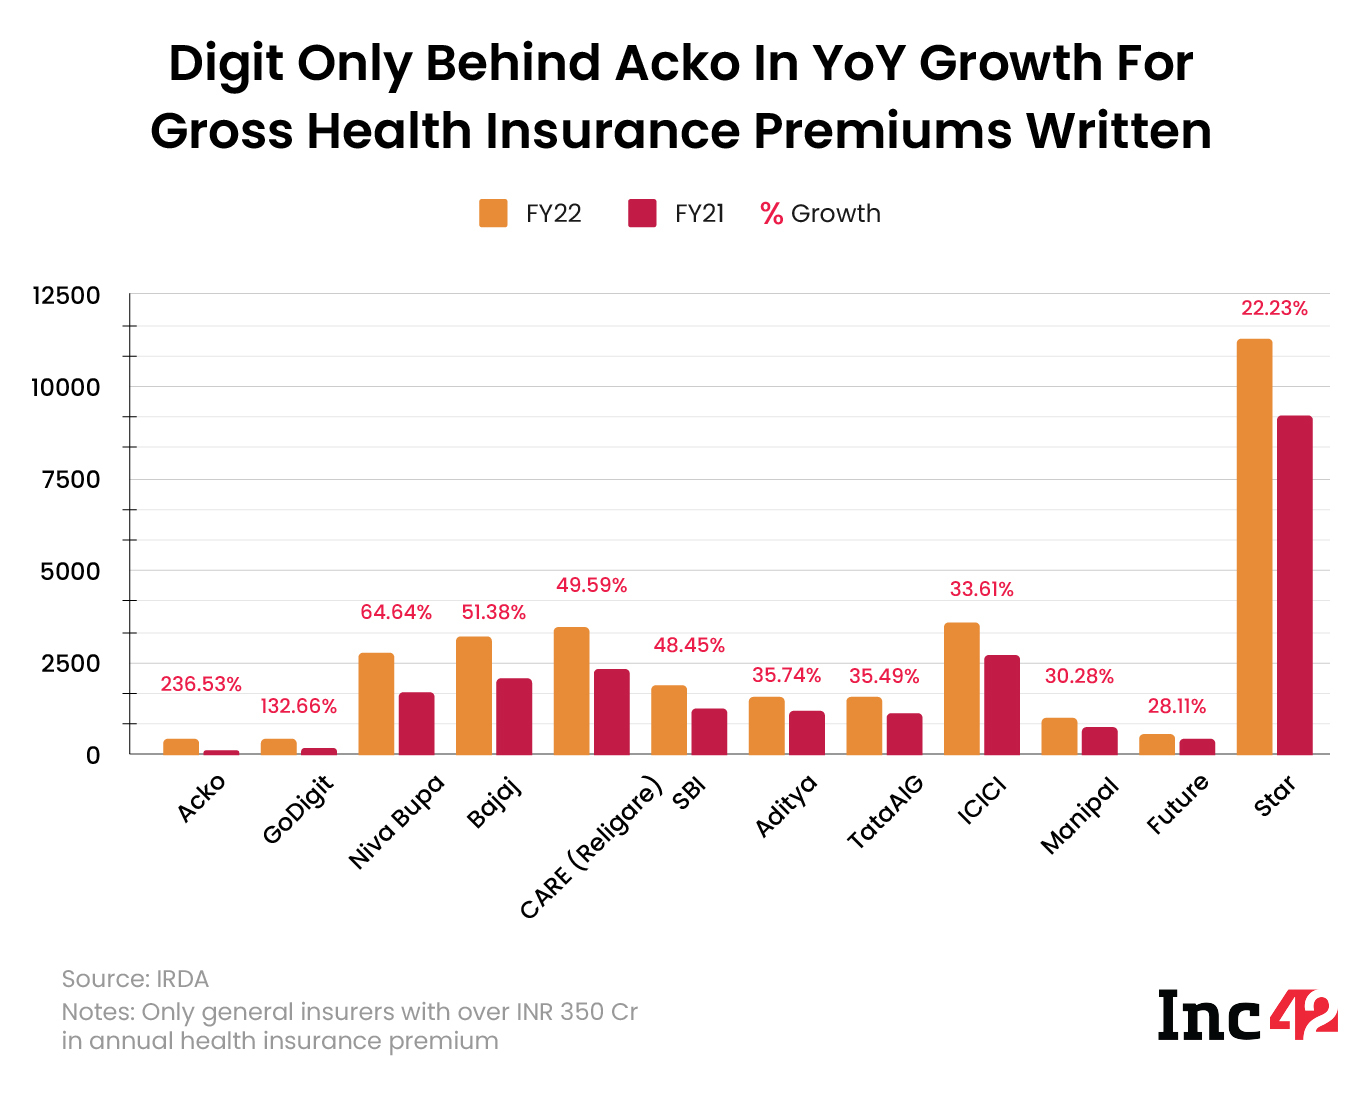 Digit Only Behind Acko in YoY Growth for Gross Health Insurance Premiums Written